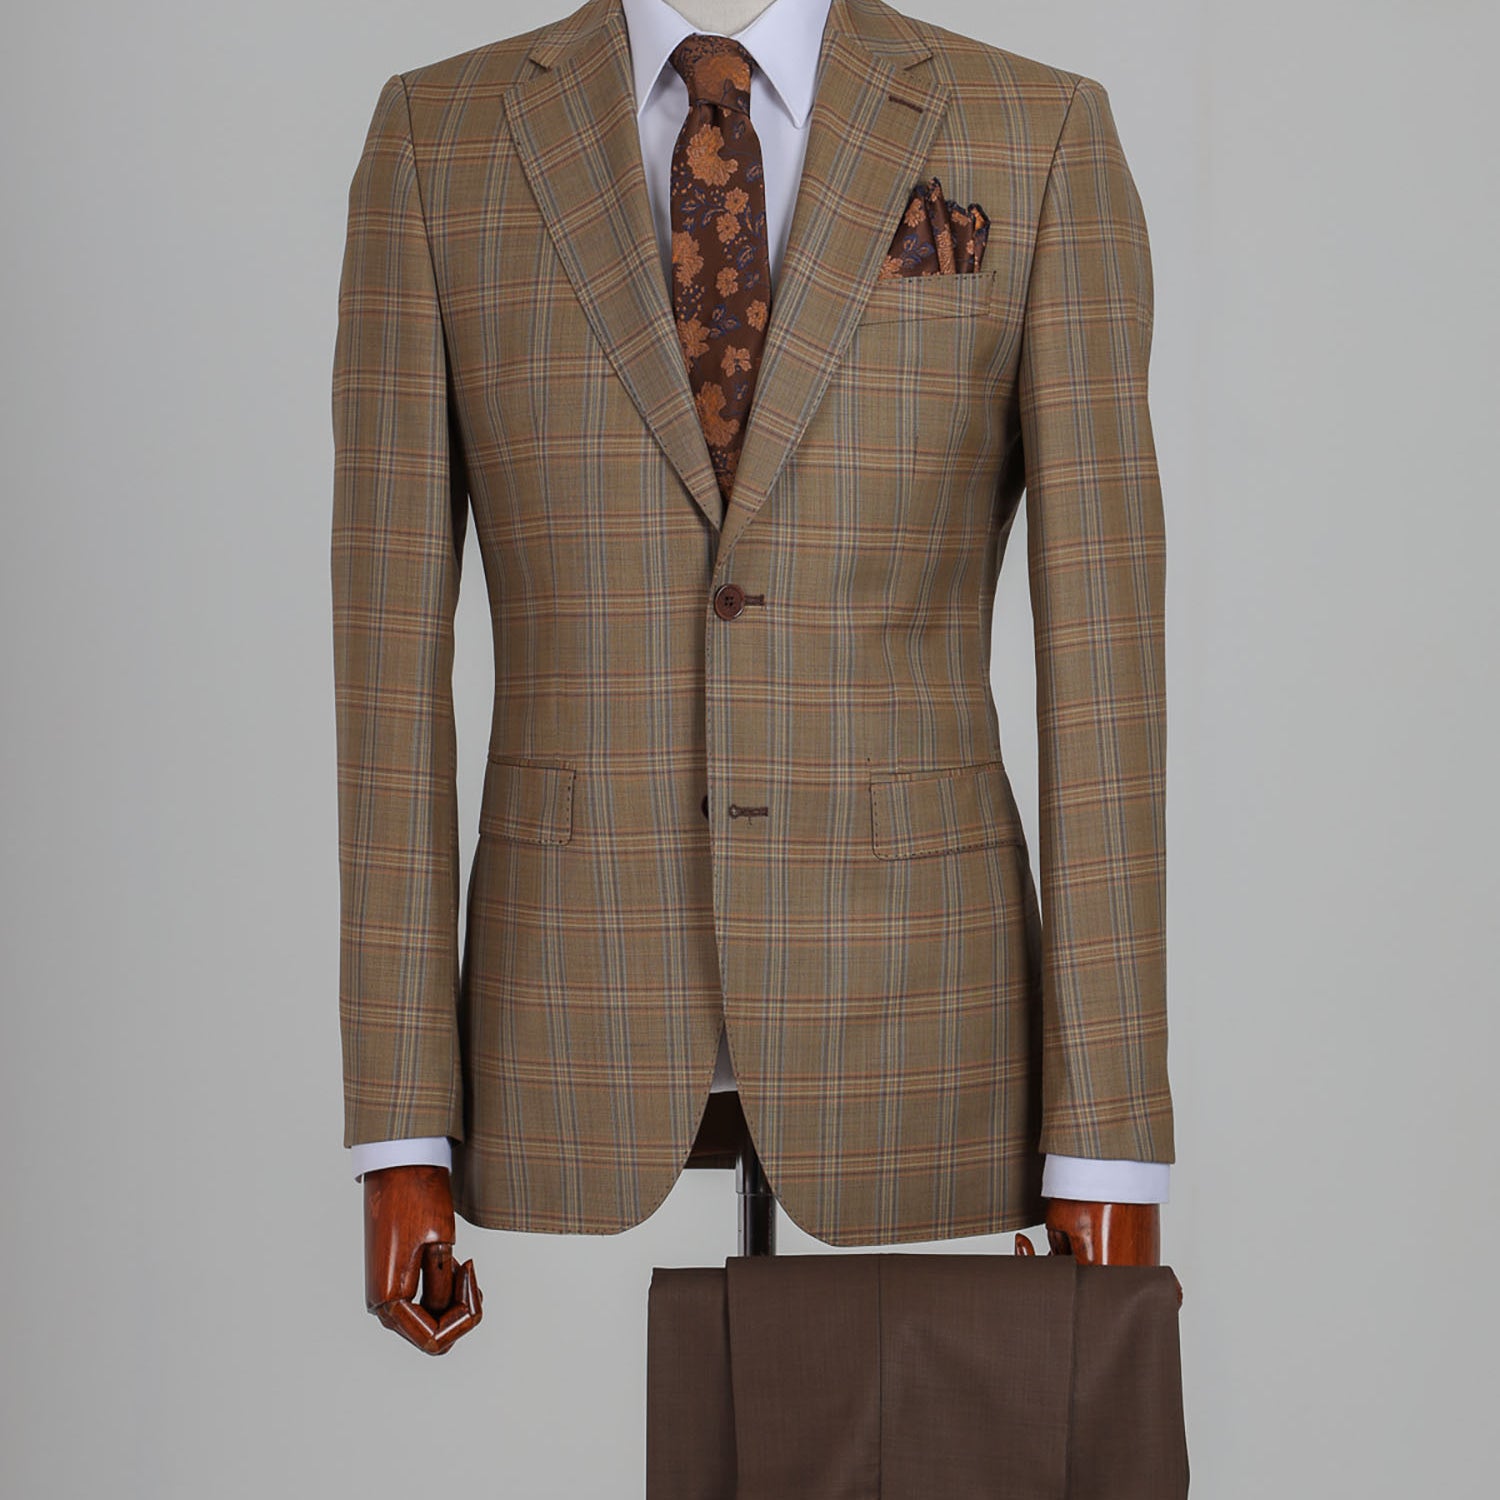 Mid-Slim Two Button Wool Jacket in Checked Design